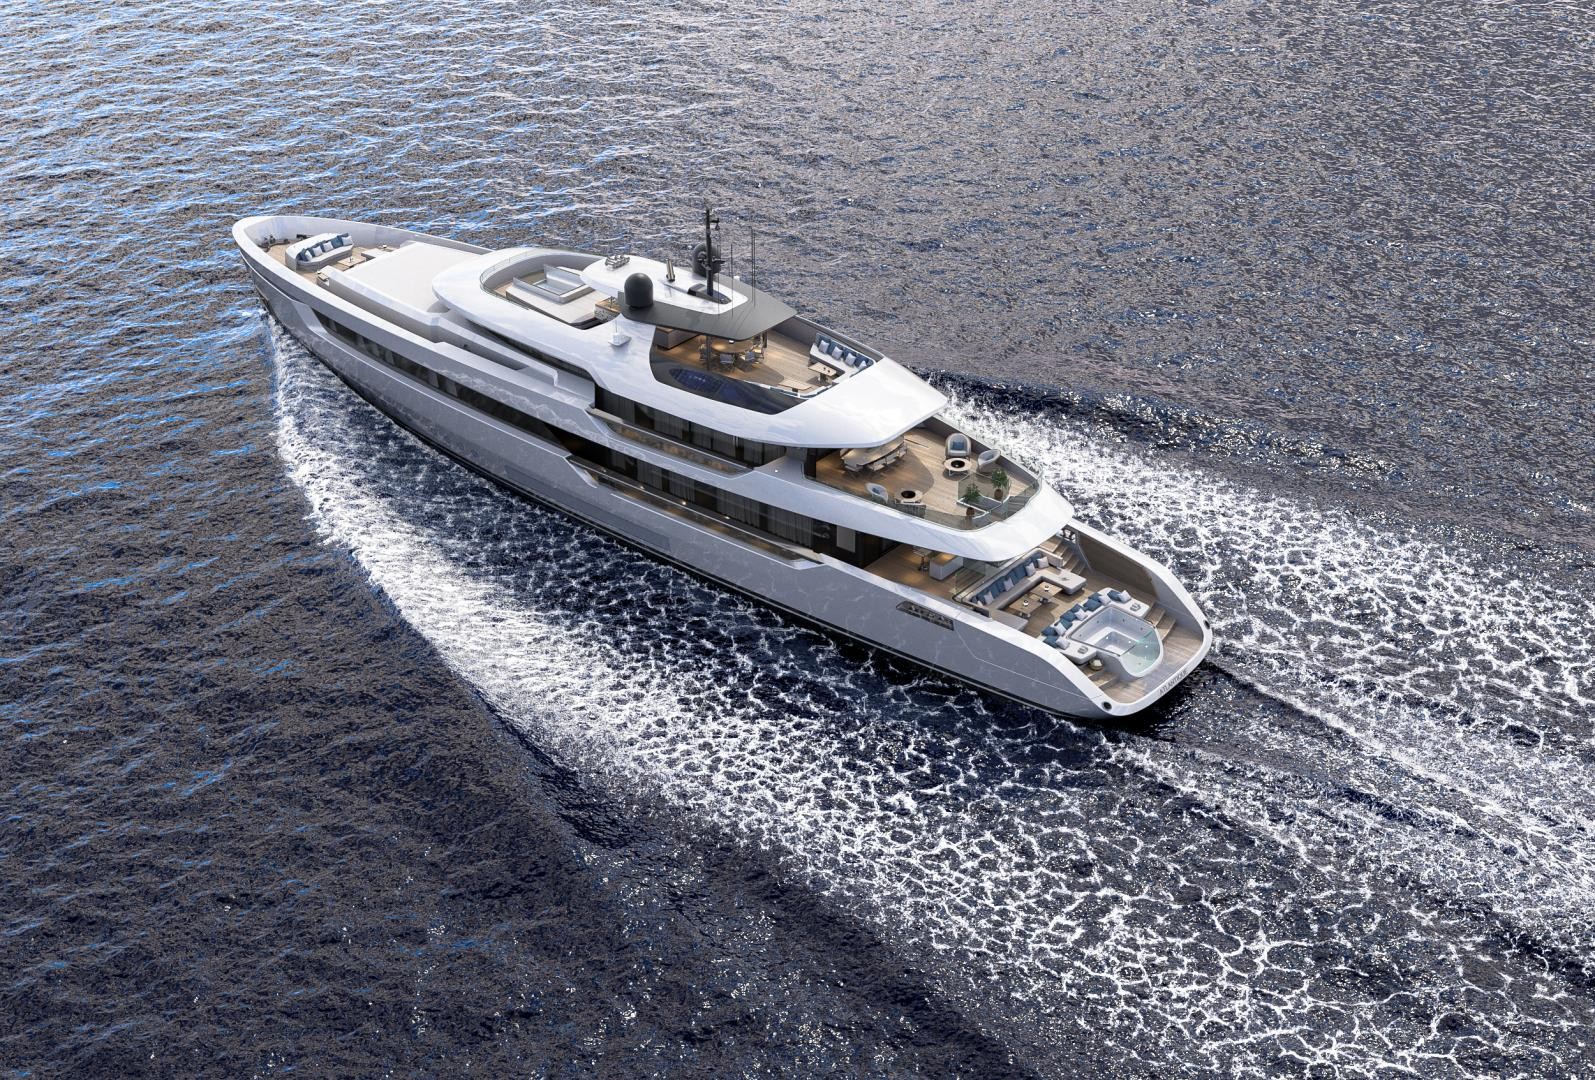 Columbus Yachts presents the two new models Atlantique line from 37 to 55 metres